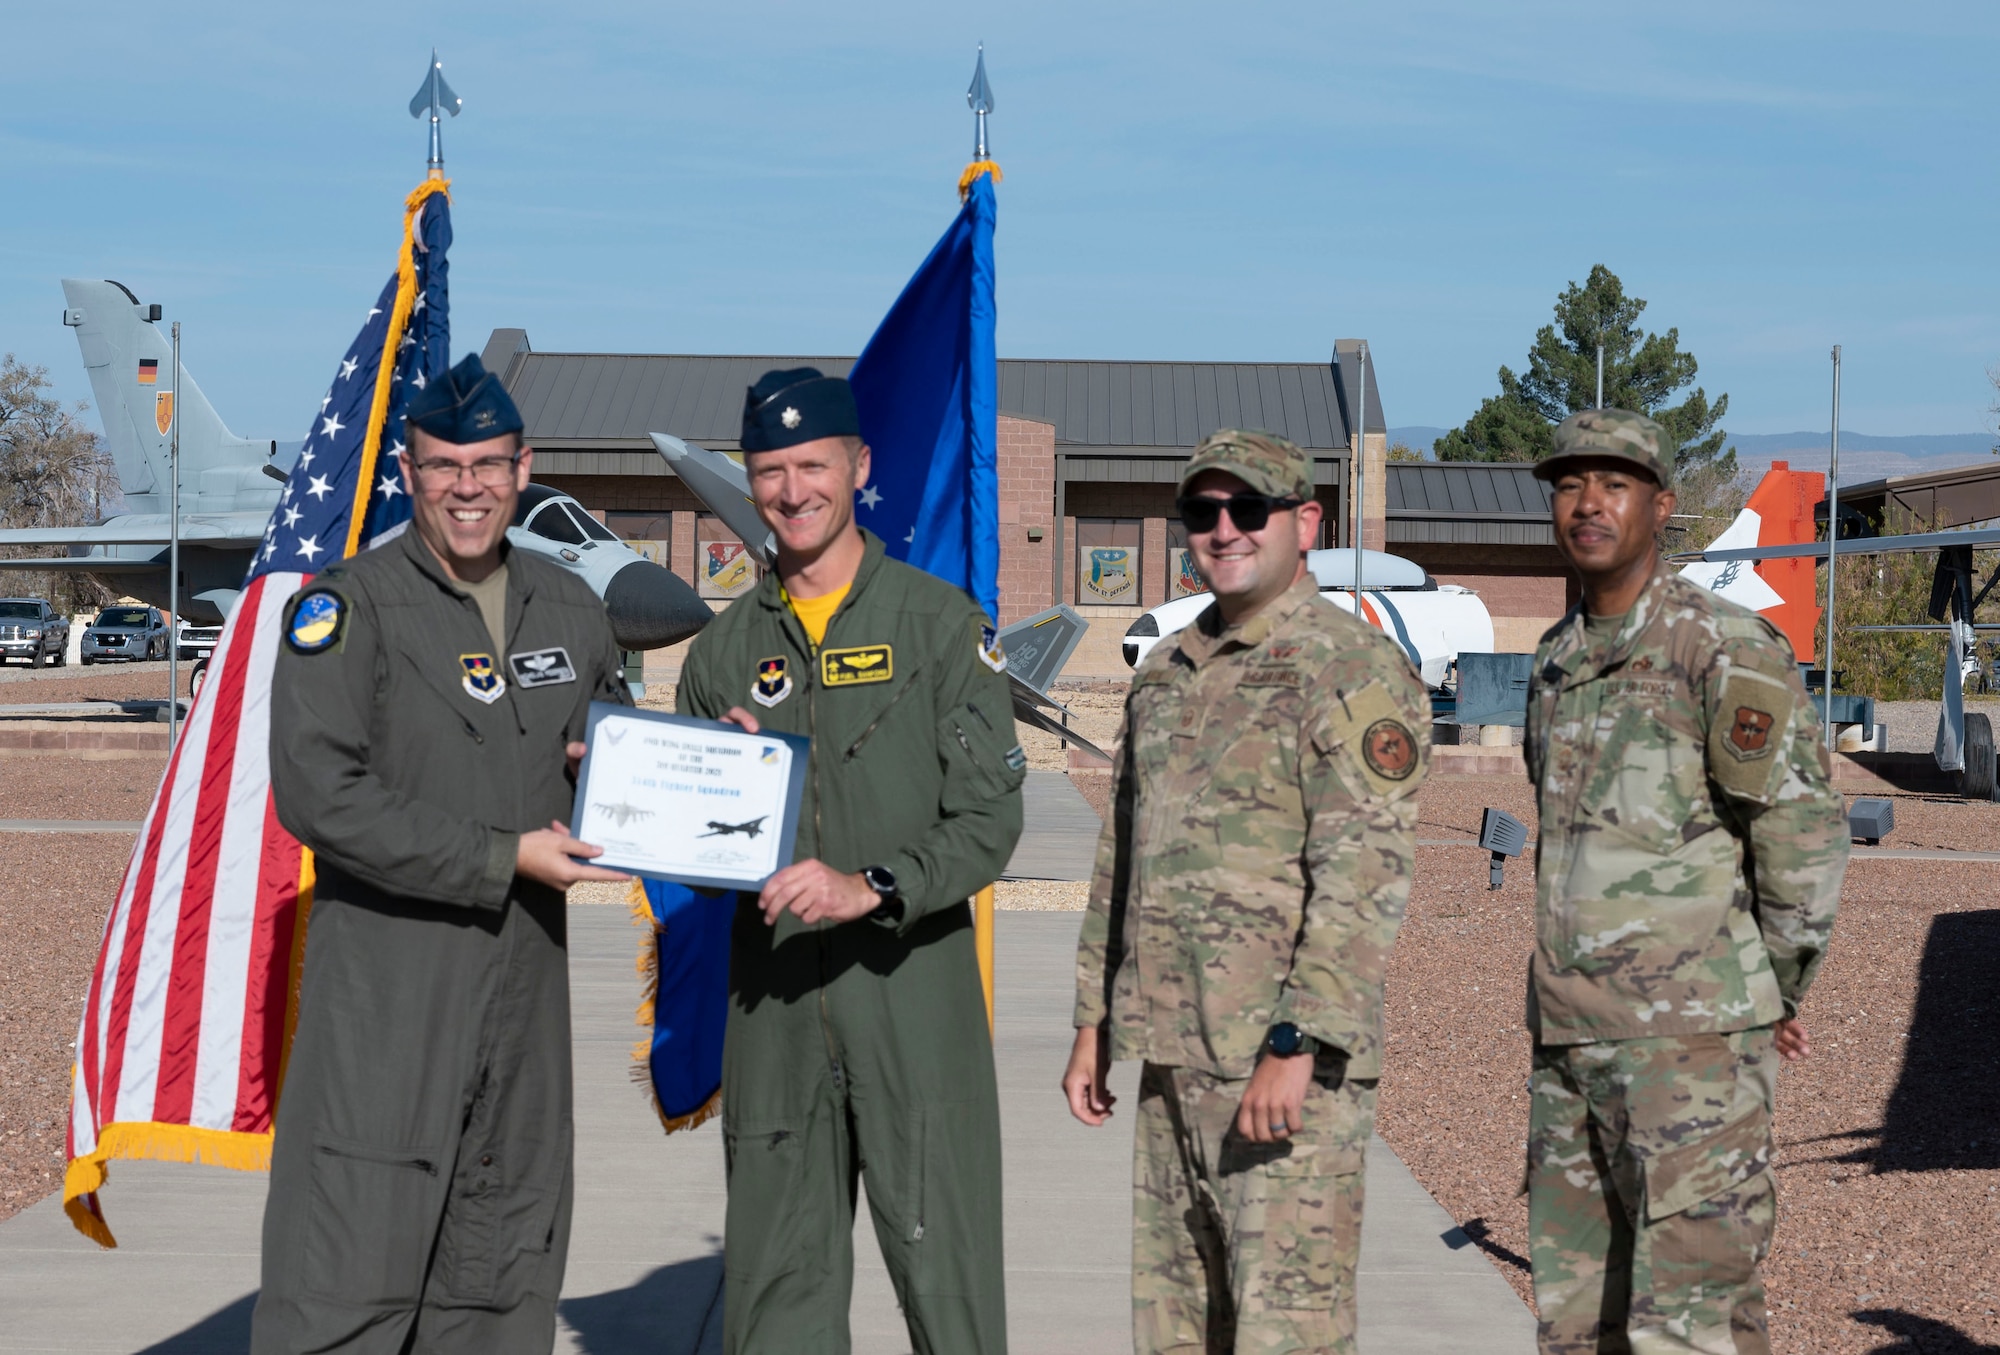 Representatives from the 314th Fighter Squadron accept the small unit of the quarter award during the 49th Wing’s 3rd quarter awards ceremony, Nov. 19, 2021, on Holloman Air Force Base, New Mexico. Quarterly award winners were selected based on their technical expertise, demonstration of leadership and job performance. (U.S. Air Force photo by Airman 1st Class Antonio Salfran)